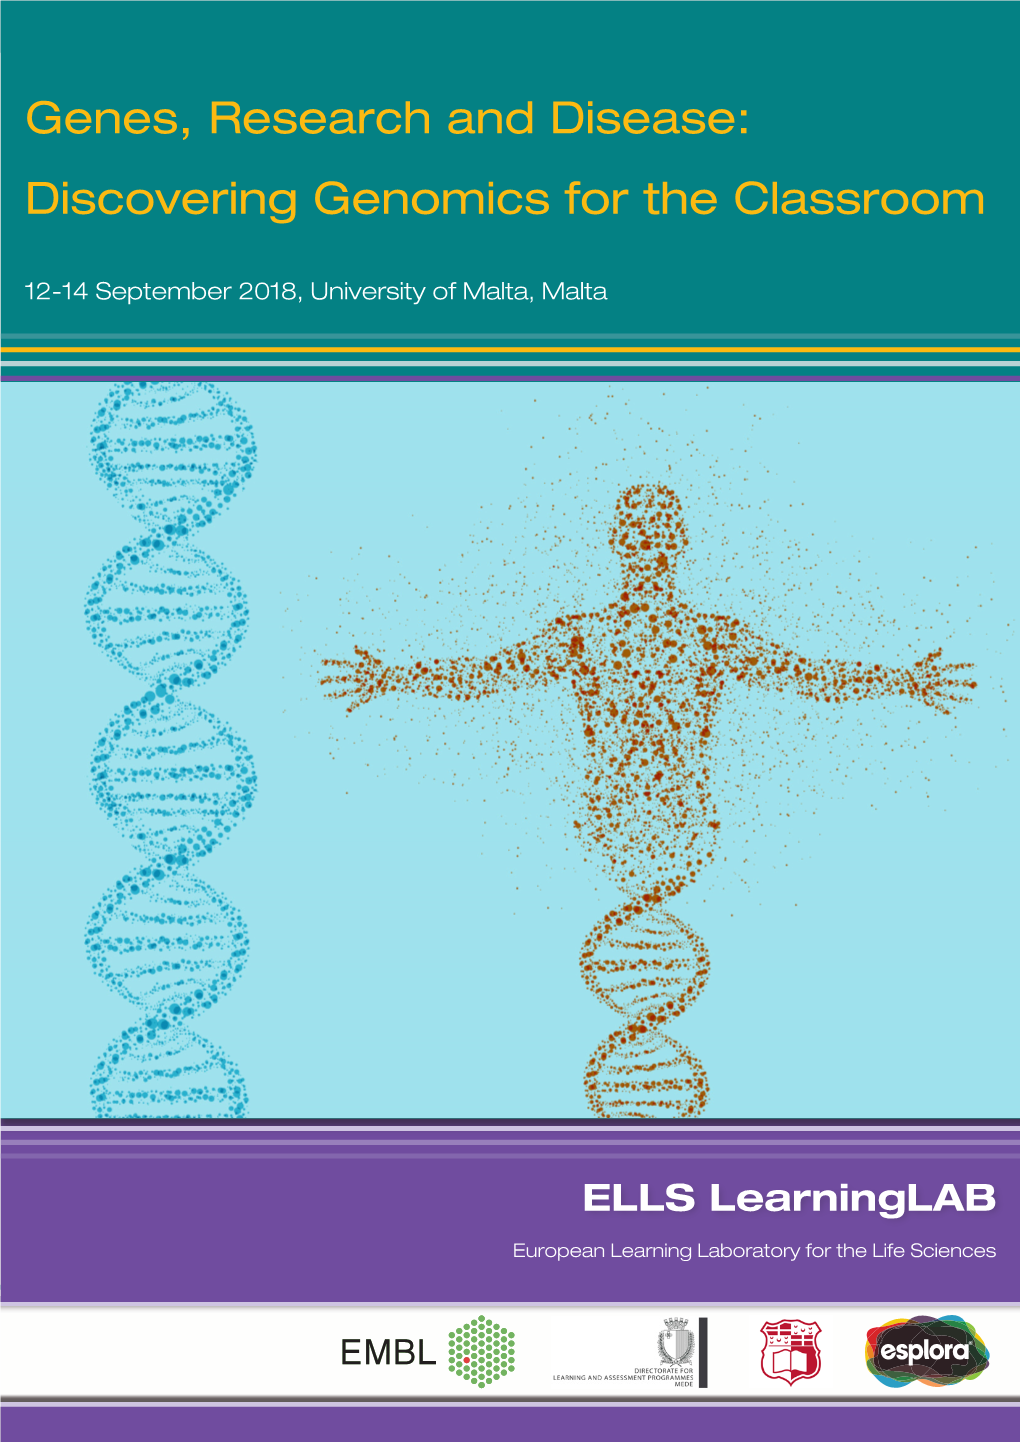 Genes, Research and Disease: Discovering Genomics for the Classroom